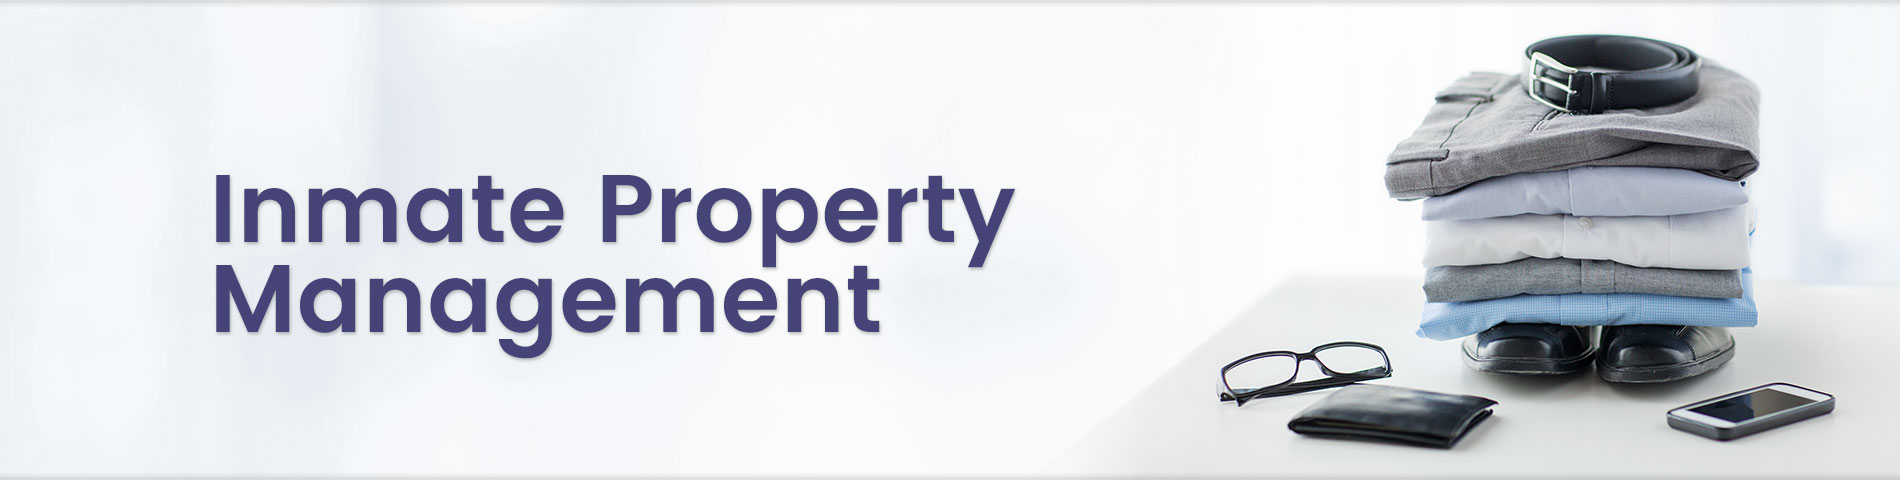 Inmate Property Management